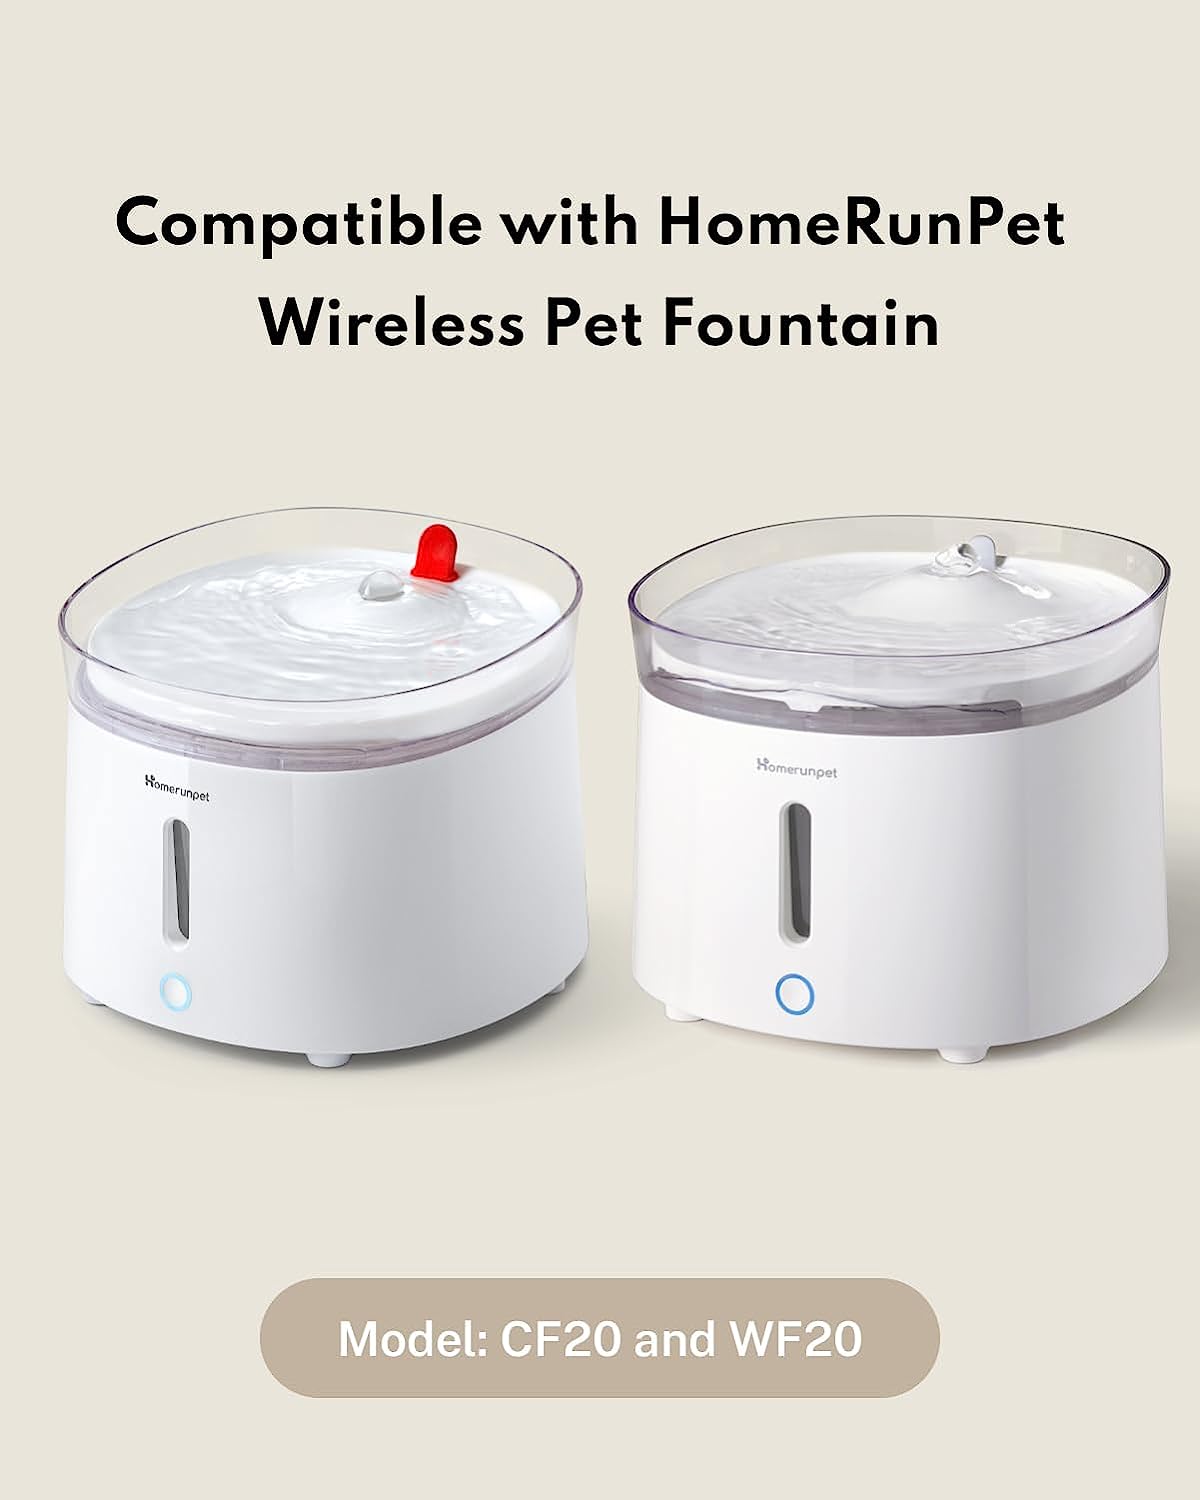 Self-Cleaning Wireless Pump Compatible with Model WF20/CF20